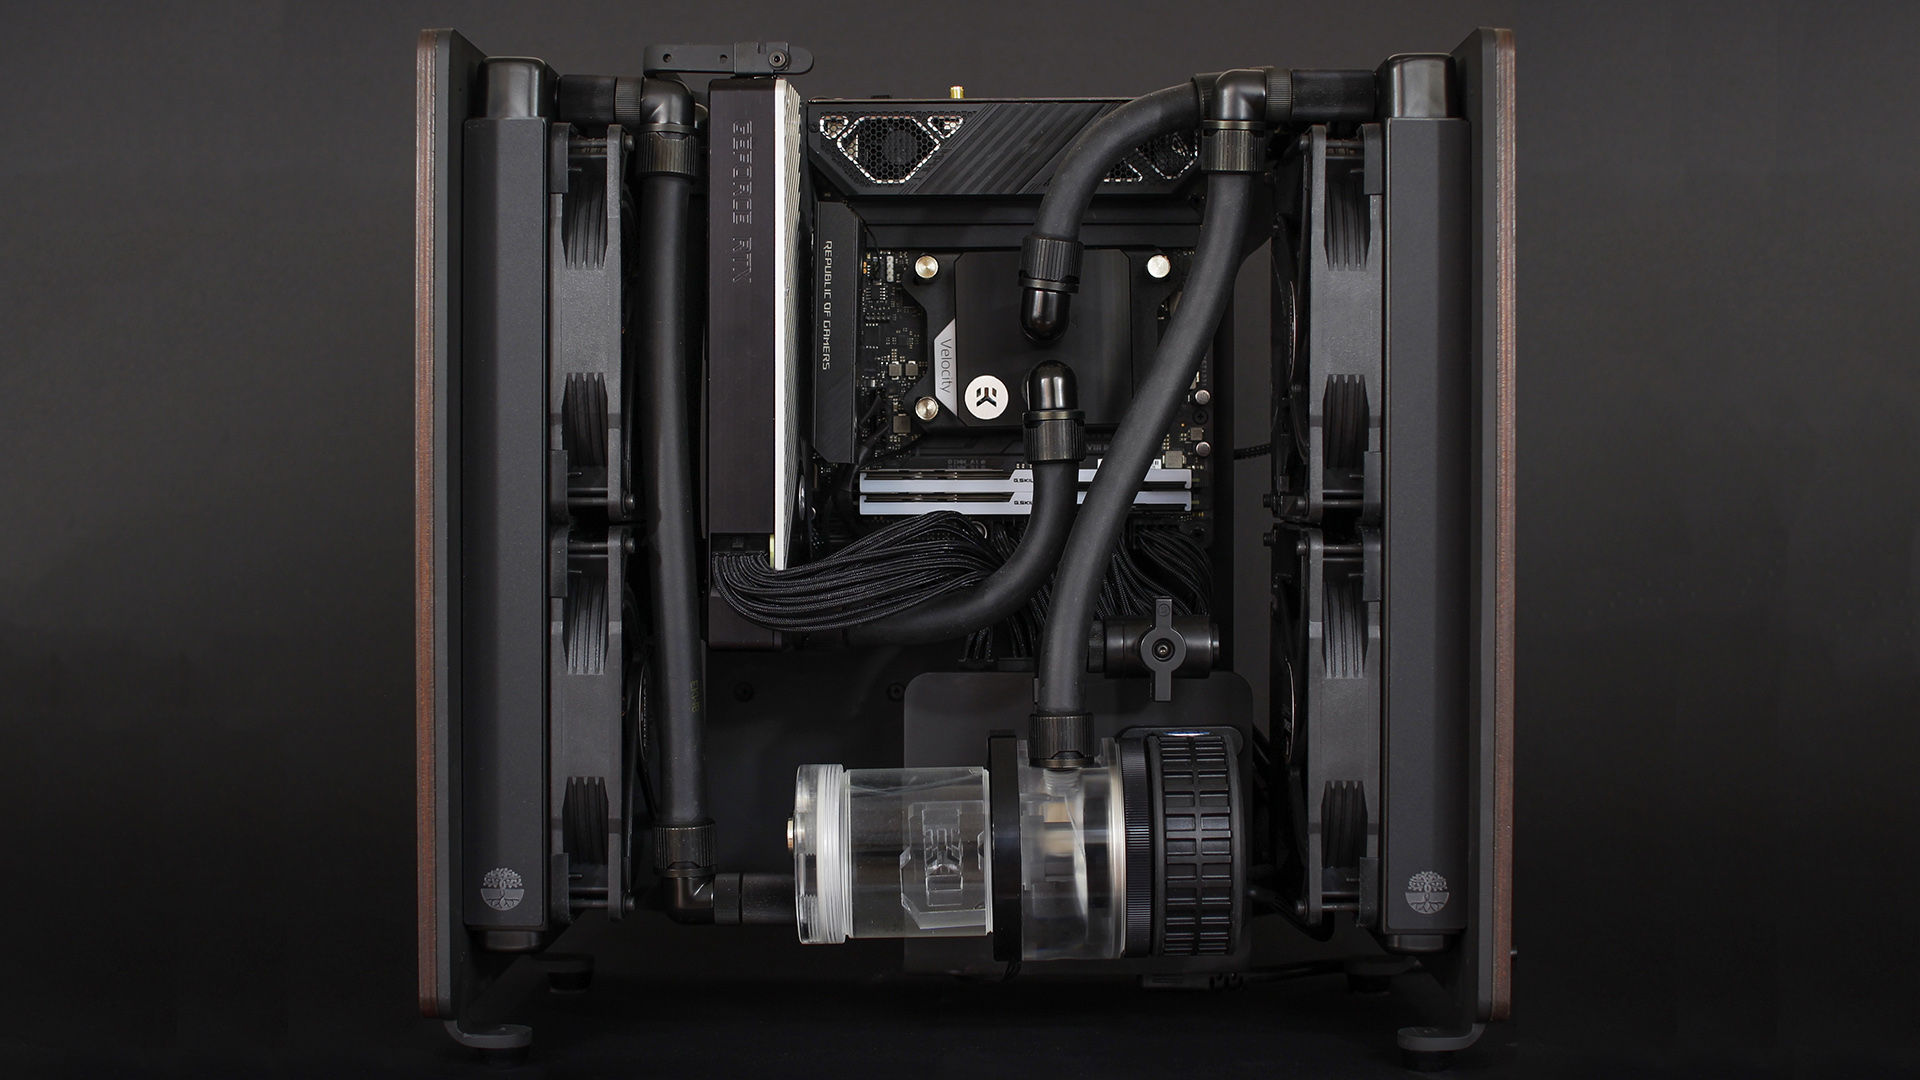 The mini gaming PC with custom water-cooling and wooden sides